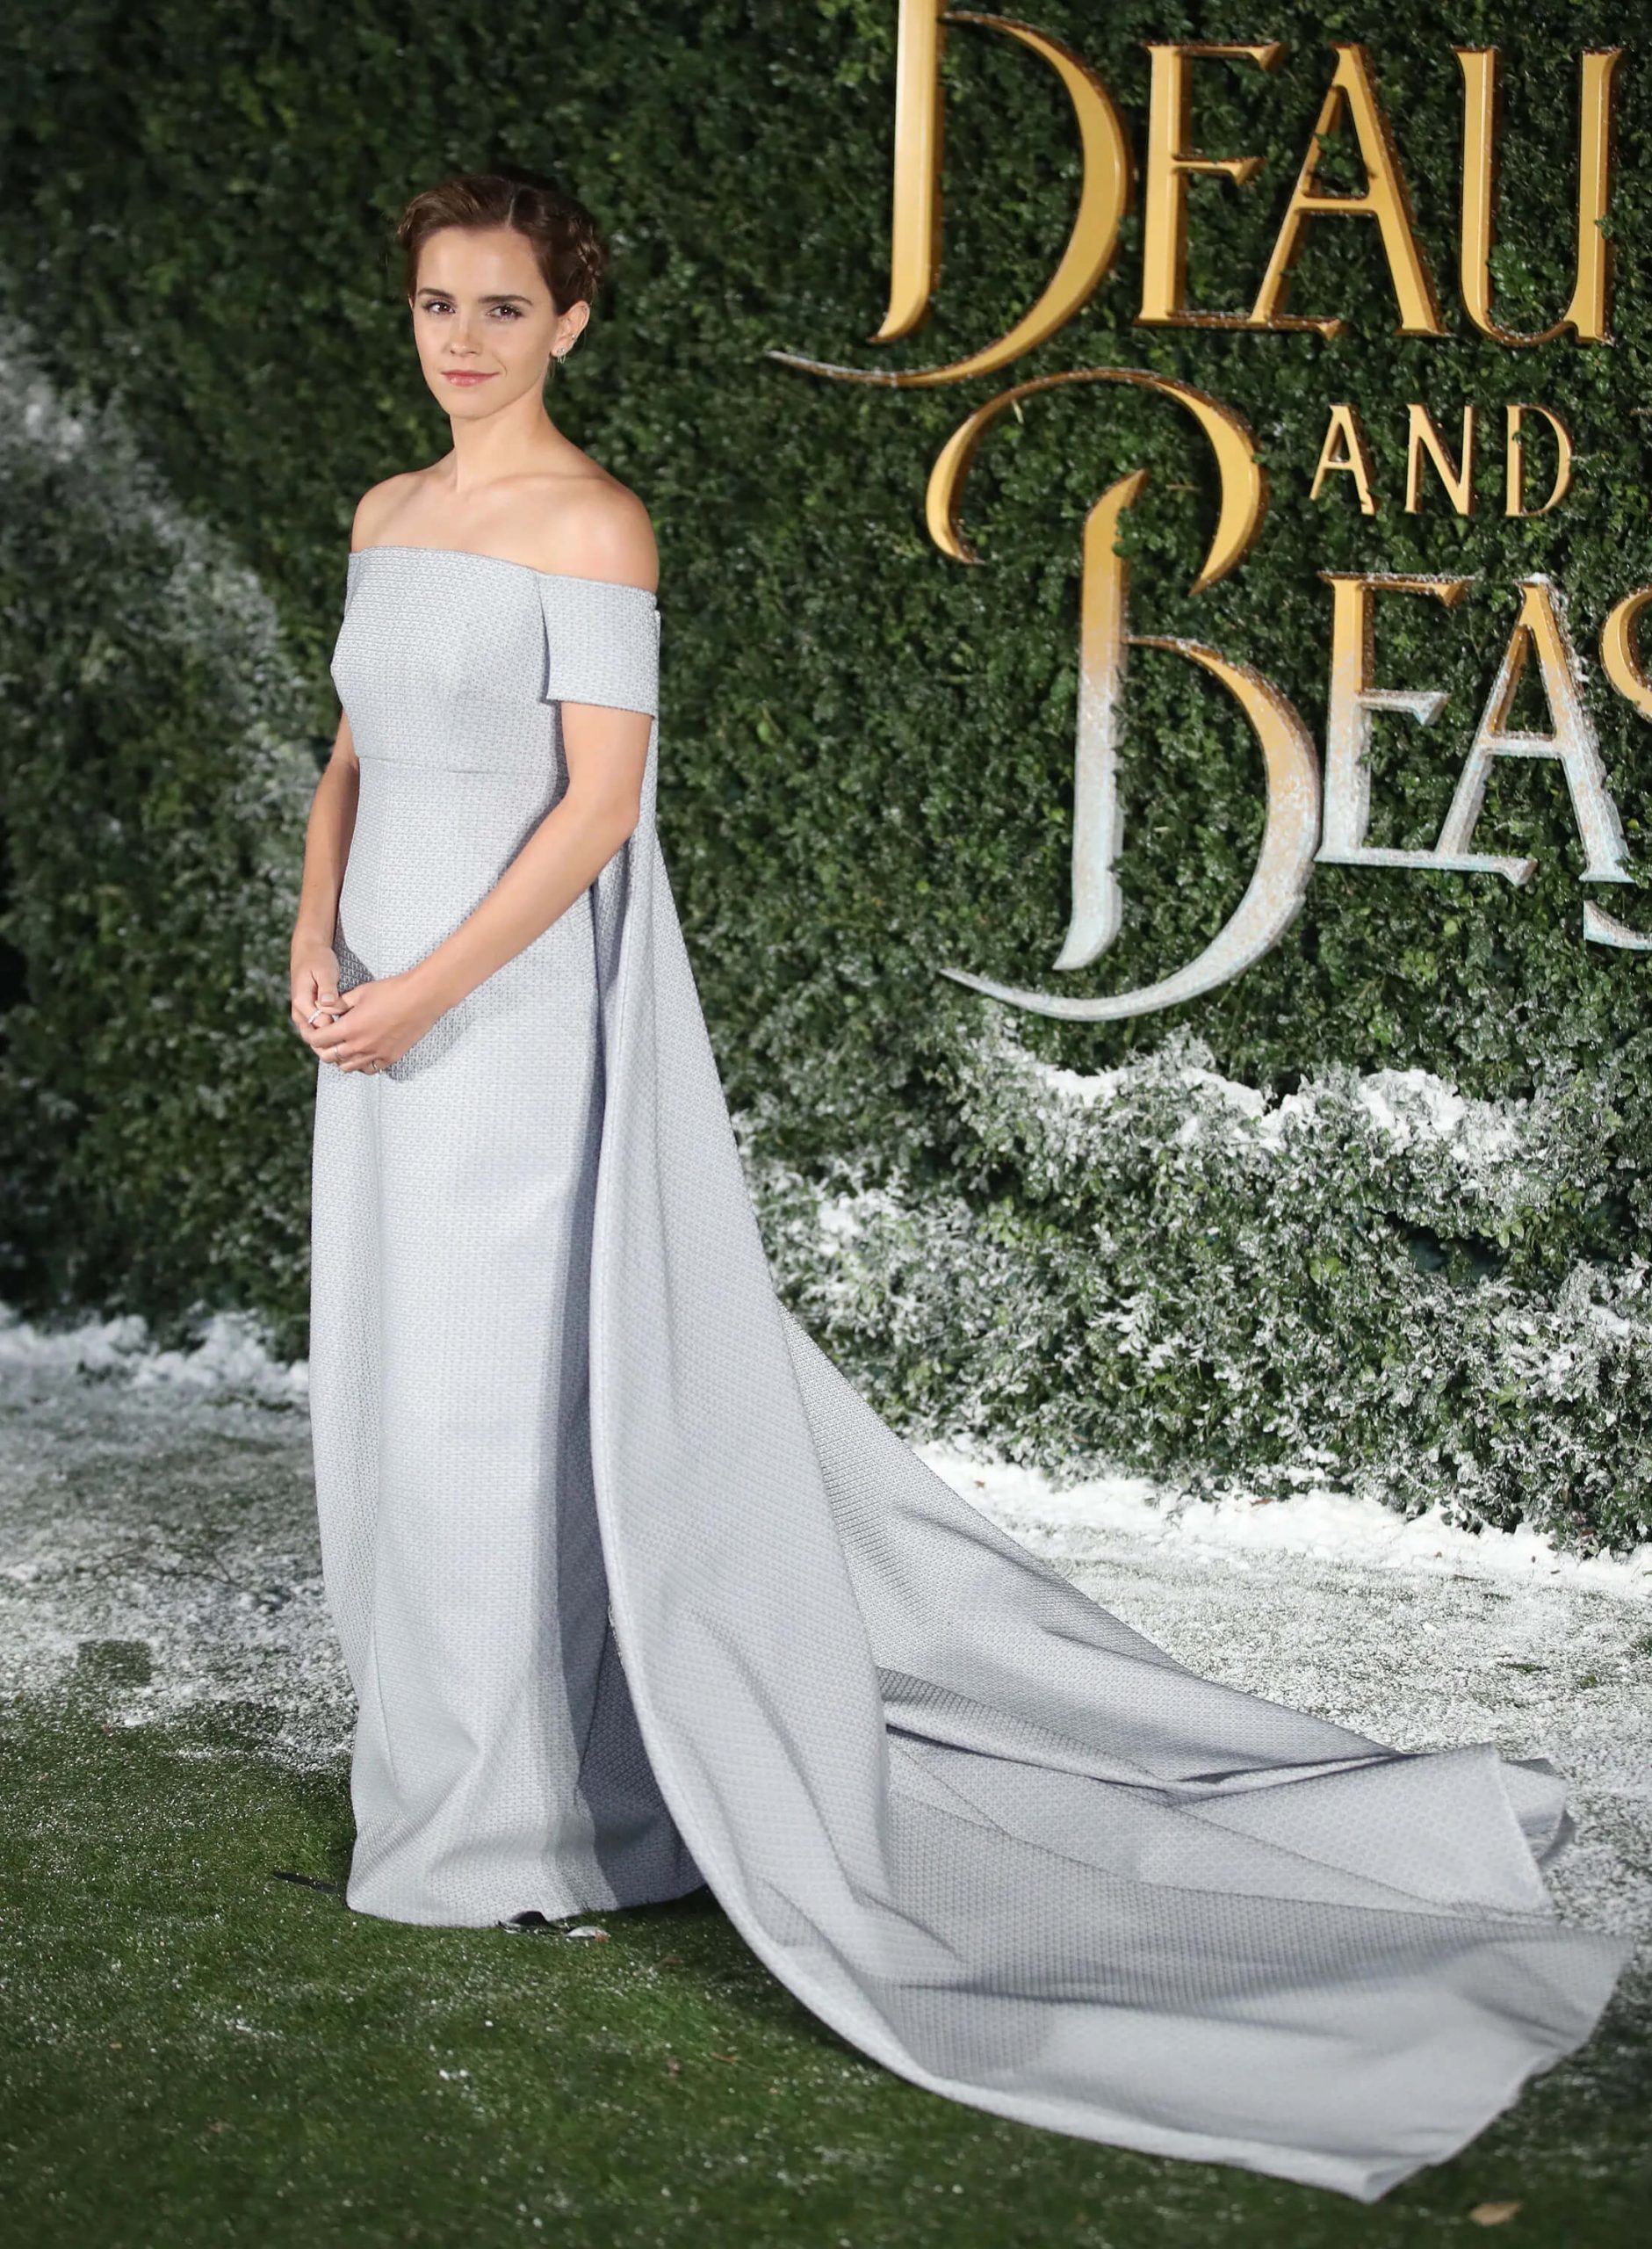 Emma Watson In Fairy-Tale Eco-Friendly Dress To The UK Premiere of 'Beauty and the Beast